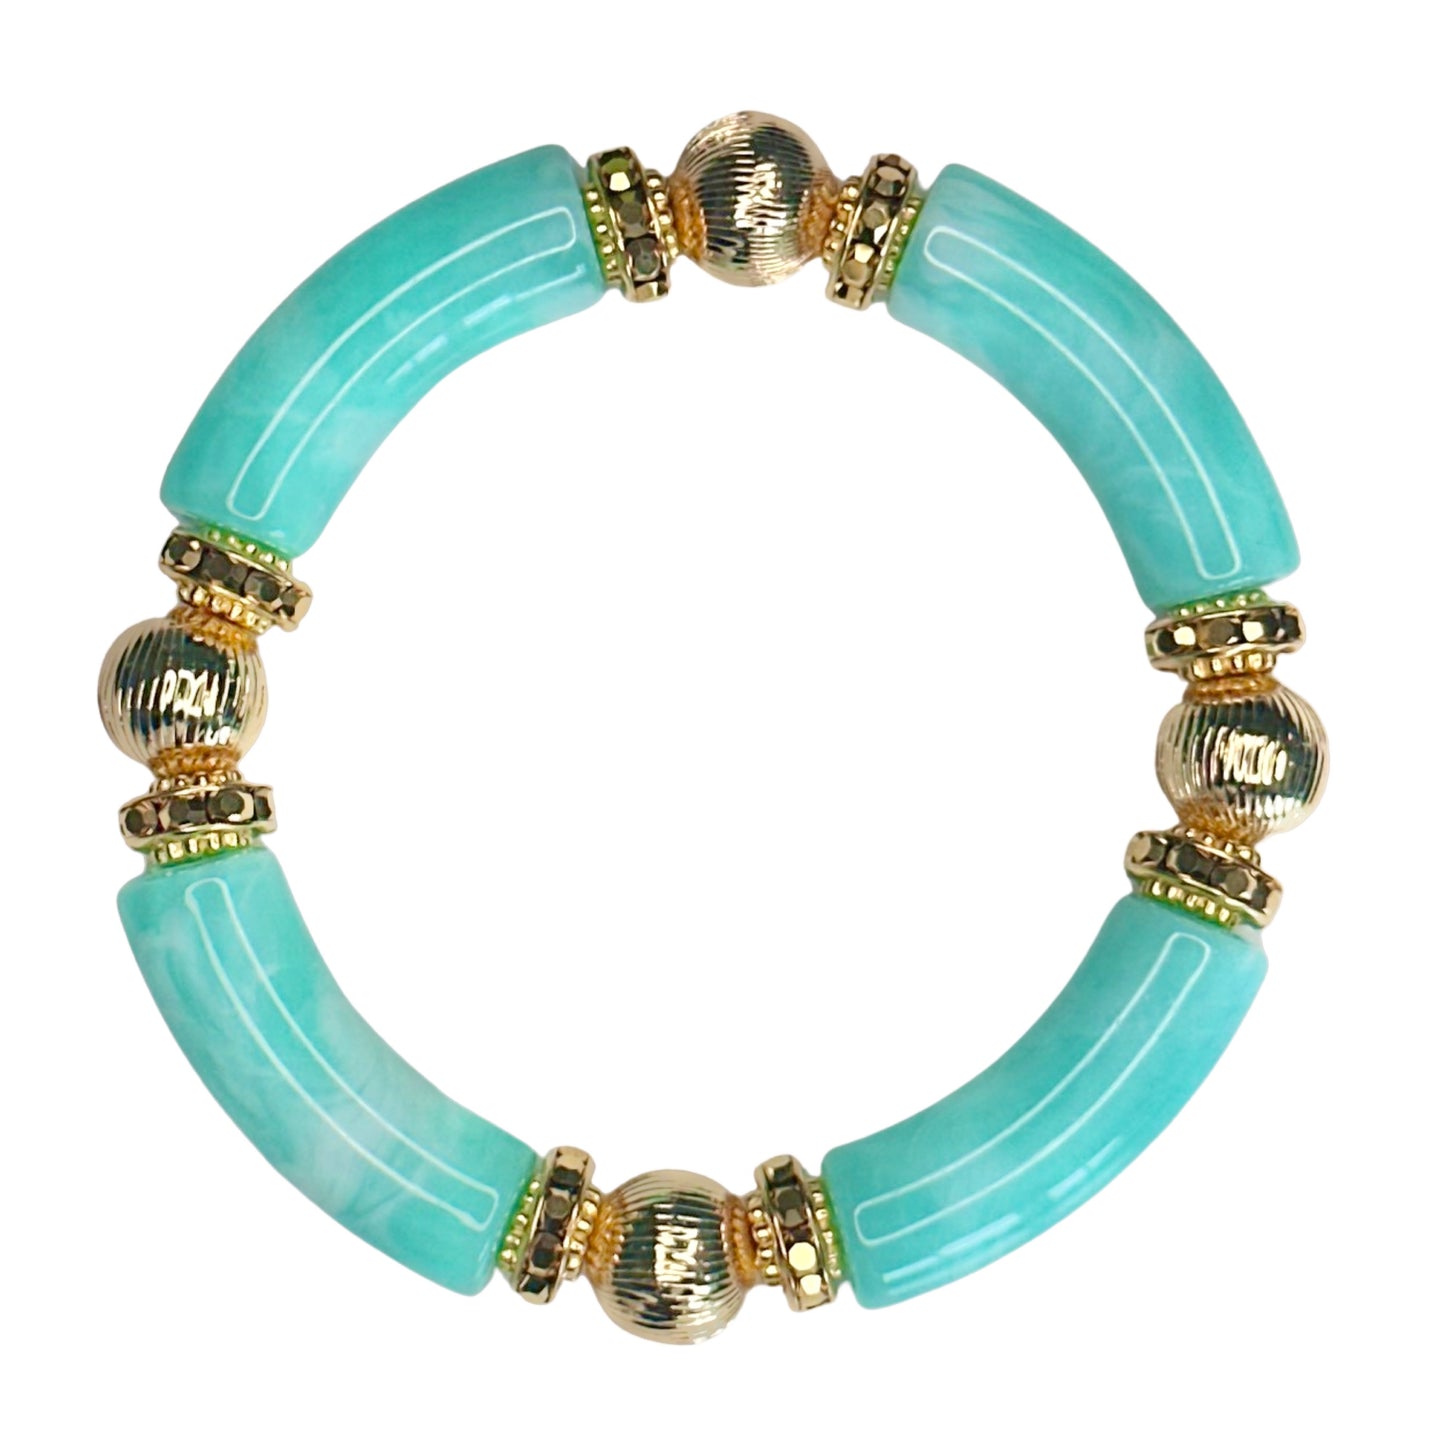 LIGHT TURQUOISE MARBLE LINK BRACELET WITH CZ ACCENTS